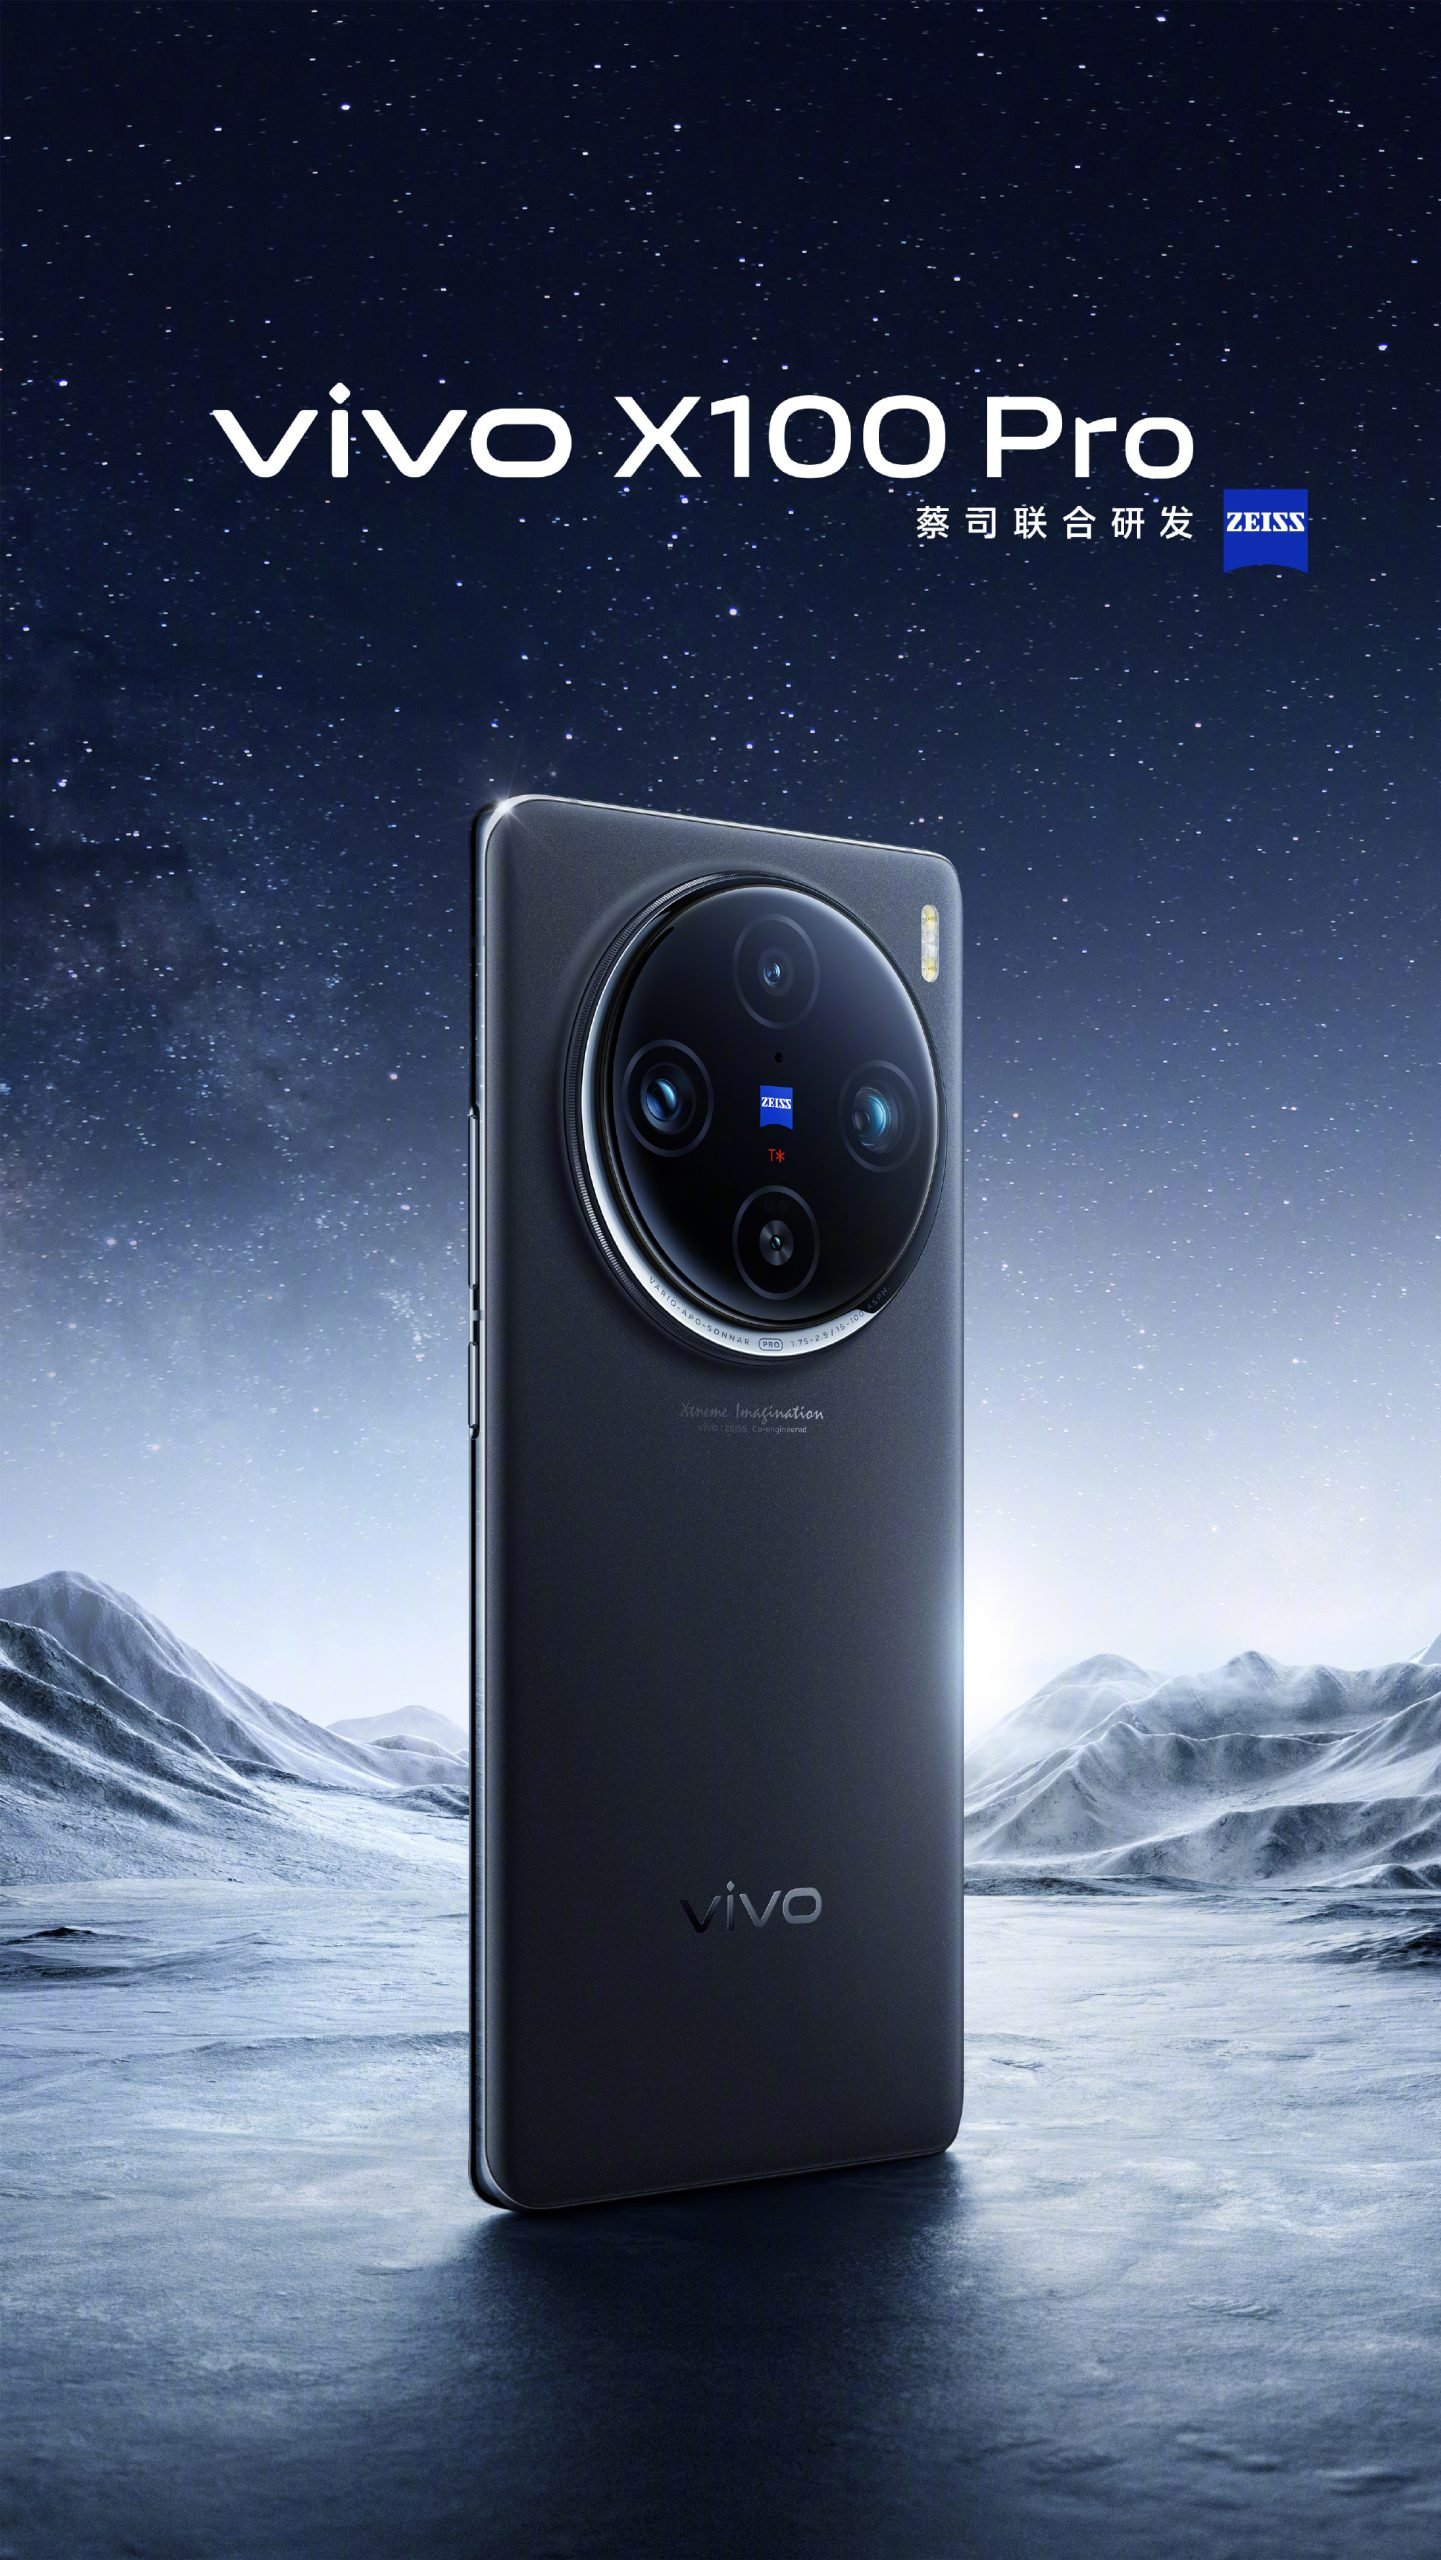 Vivo X100 Pro debuts in its homeland with eye-watering specs